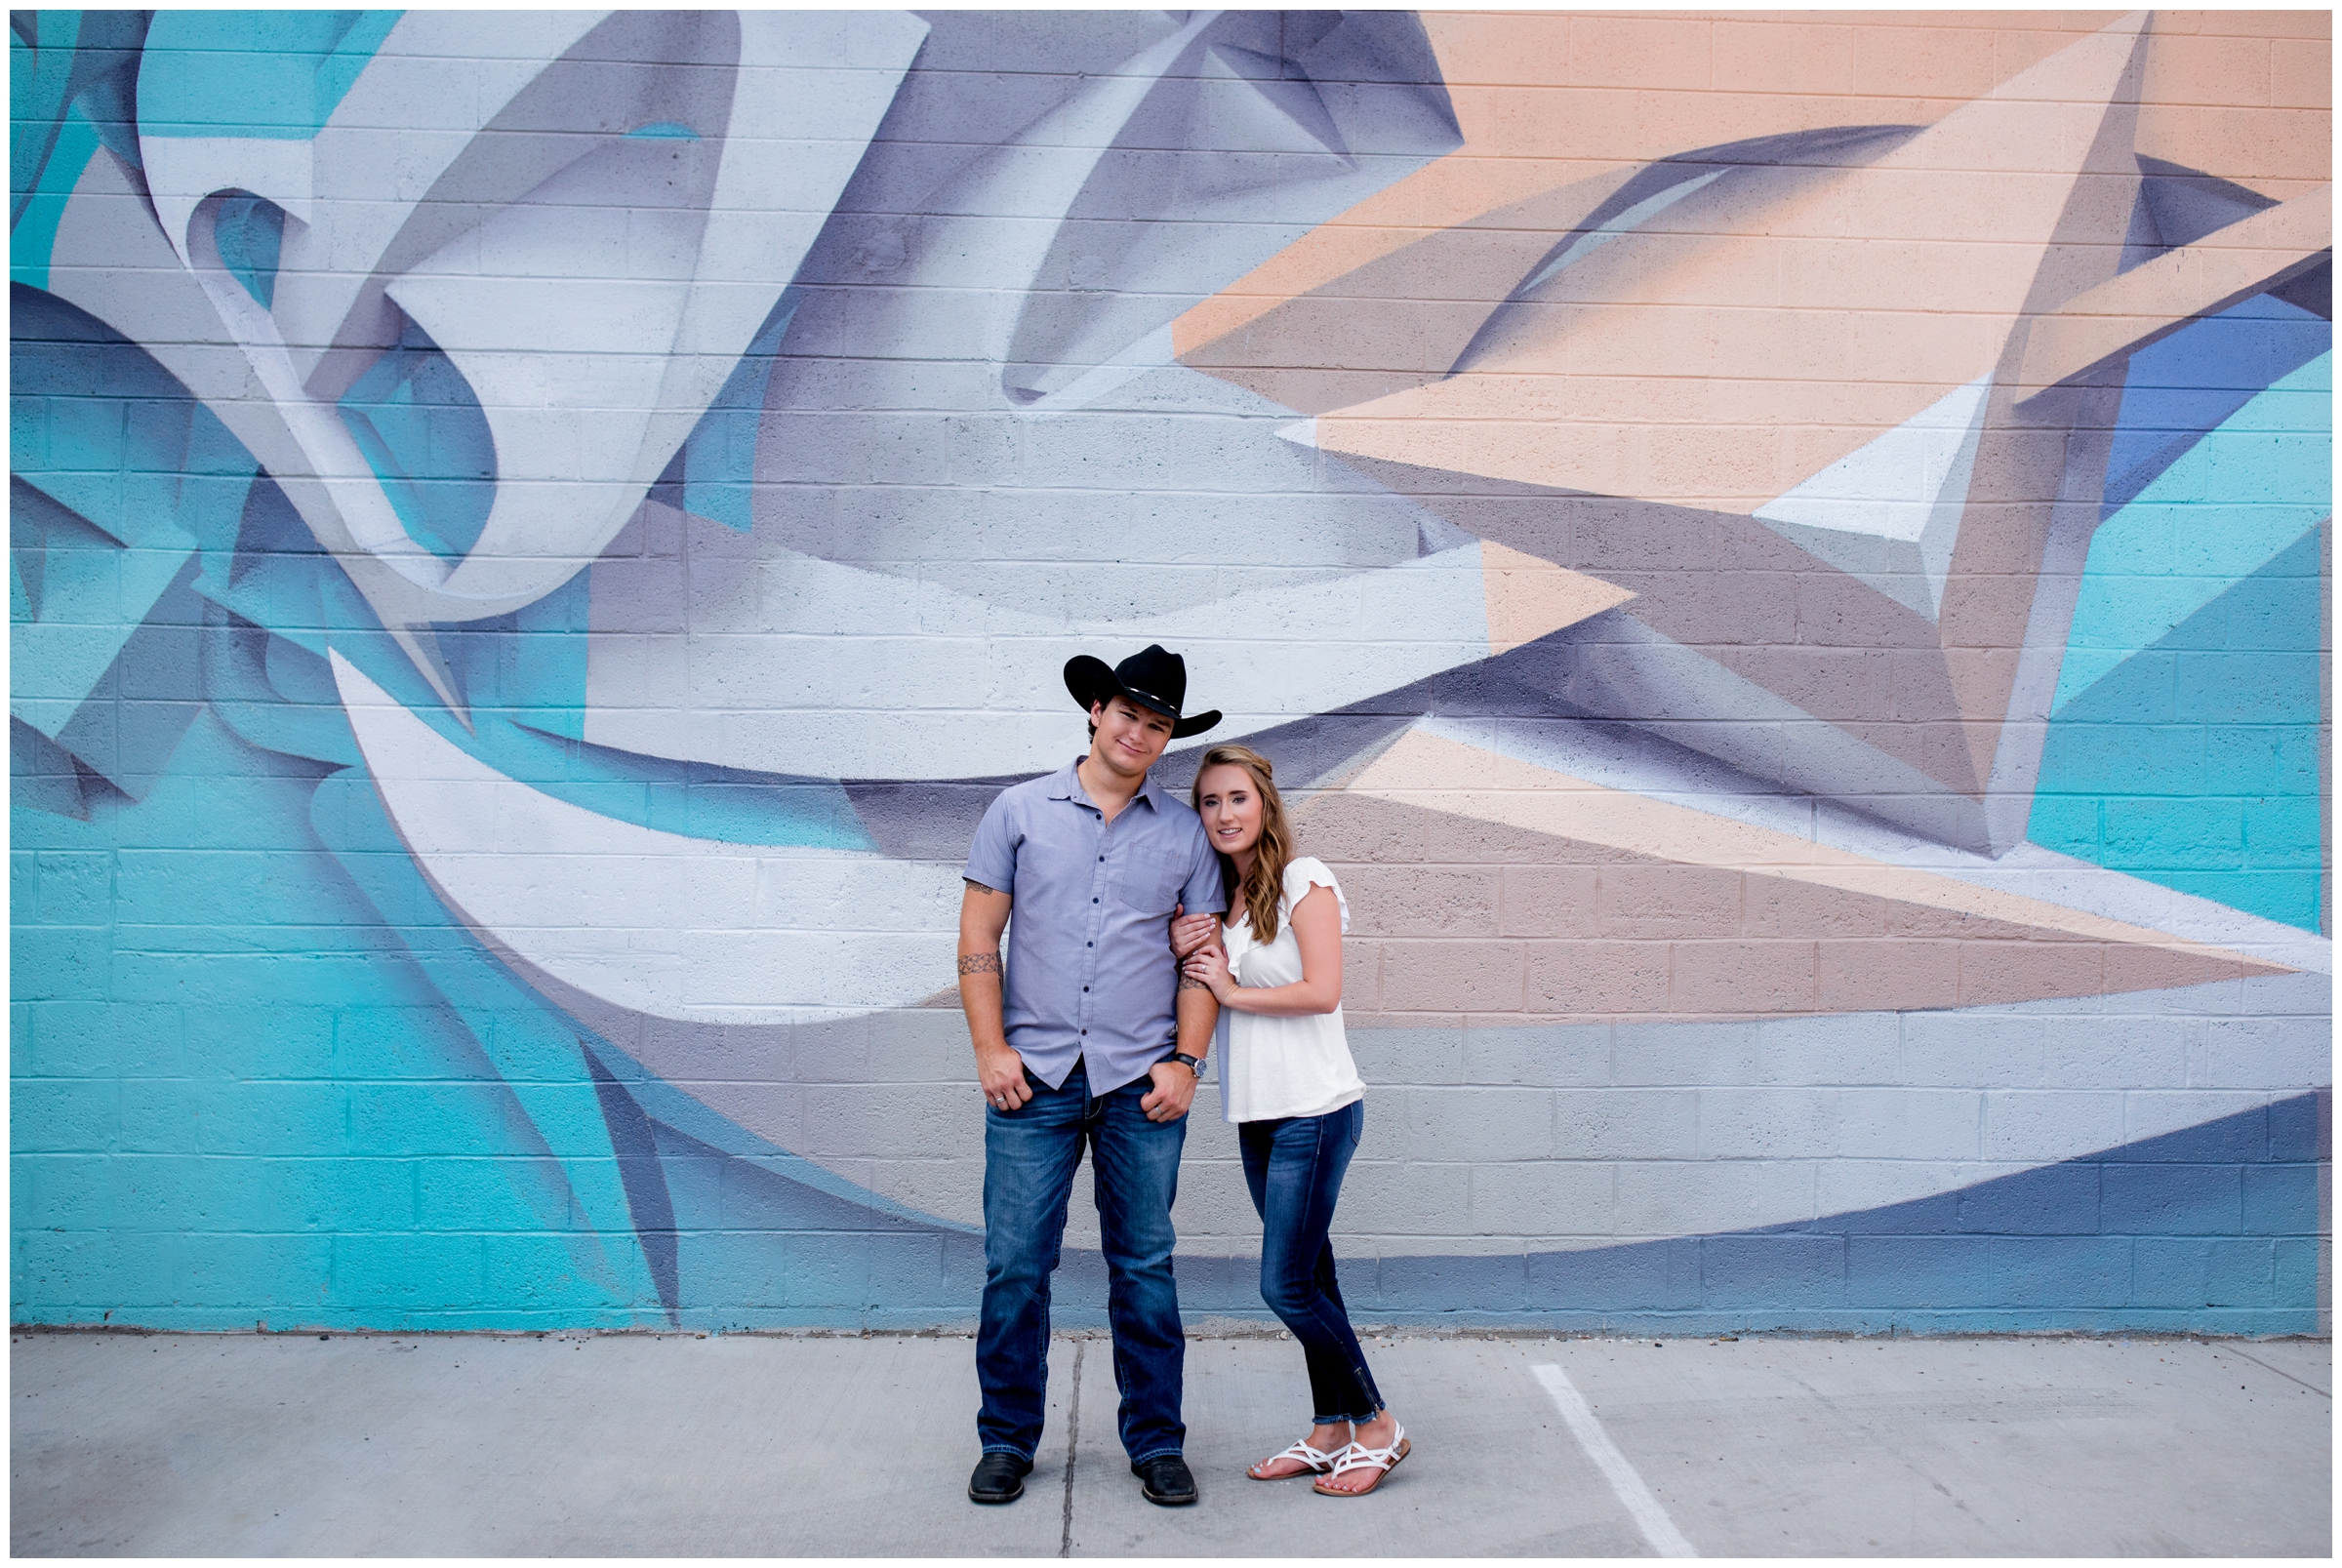 urban graffiti engagement photography inspiration by Fort Collins photographer Plum Pretty Photo 